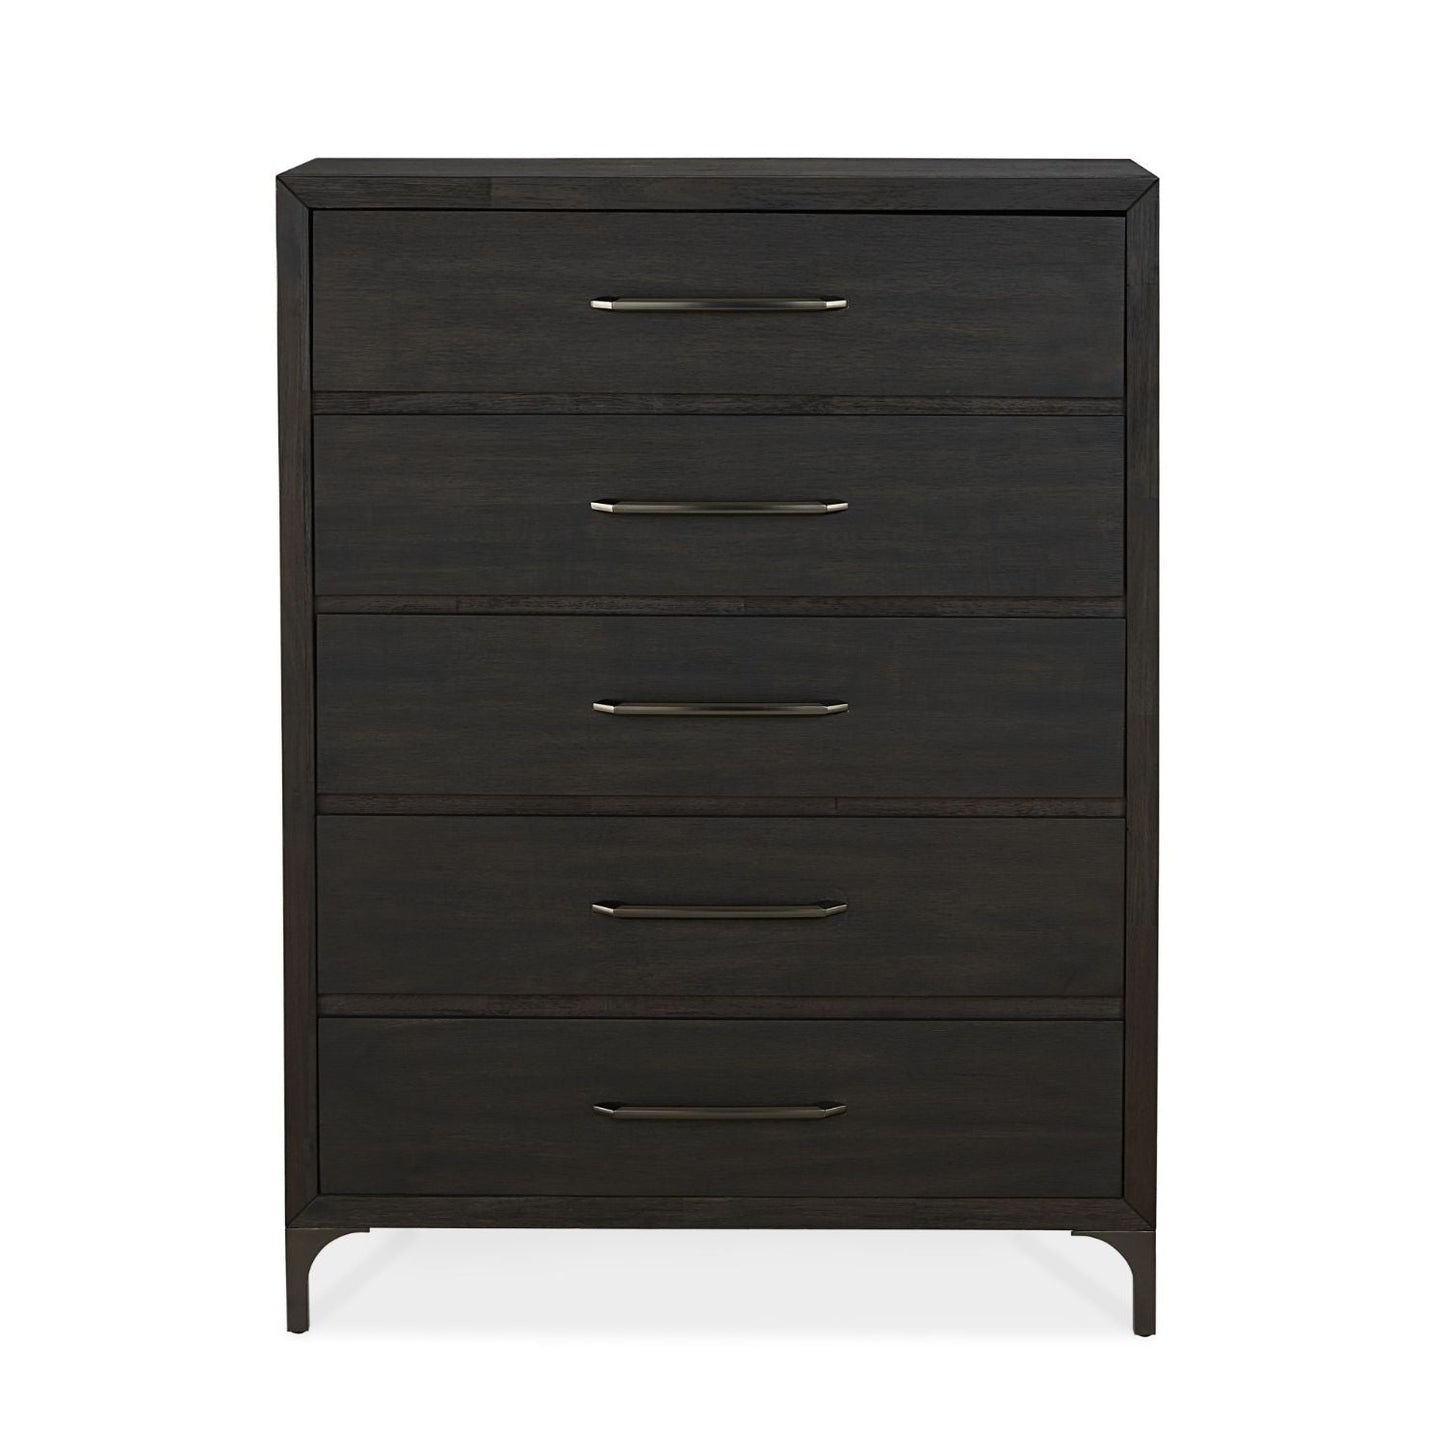 Modus Lucerne Five Drawer Chest in Vintage Coffee